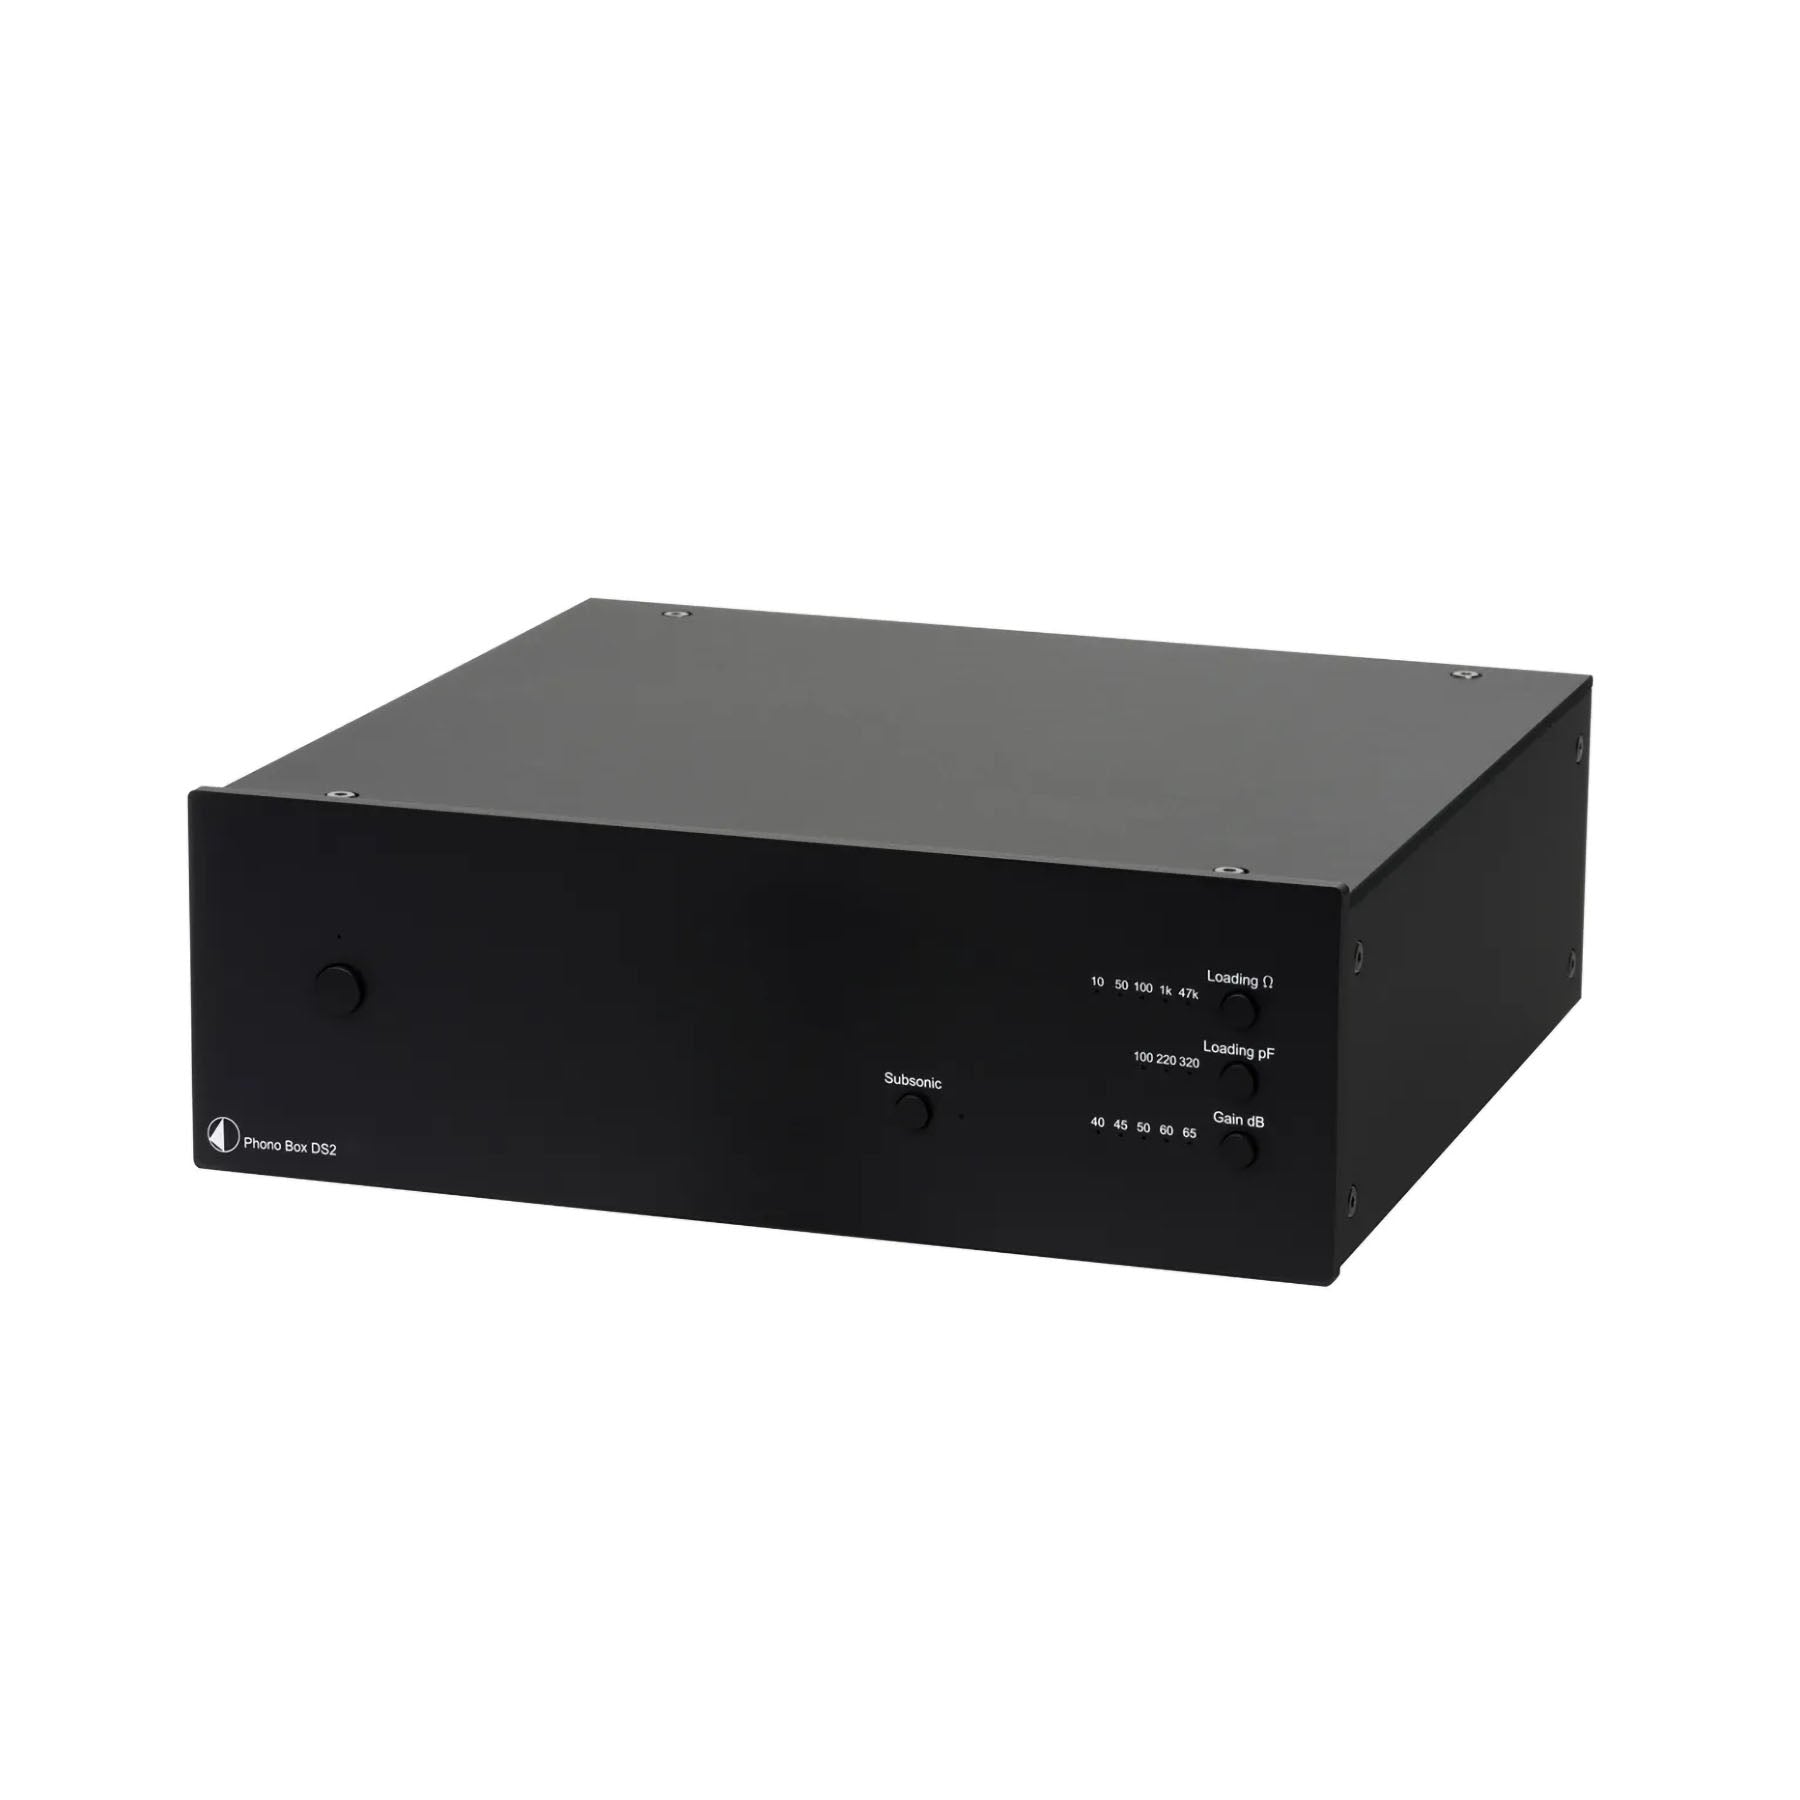 Pro-Ject Phono Box DS2 Phono Preamplifier